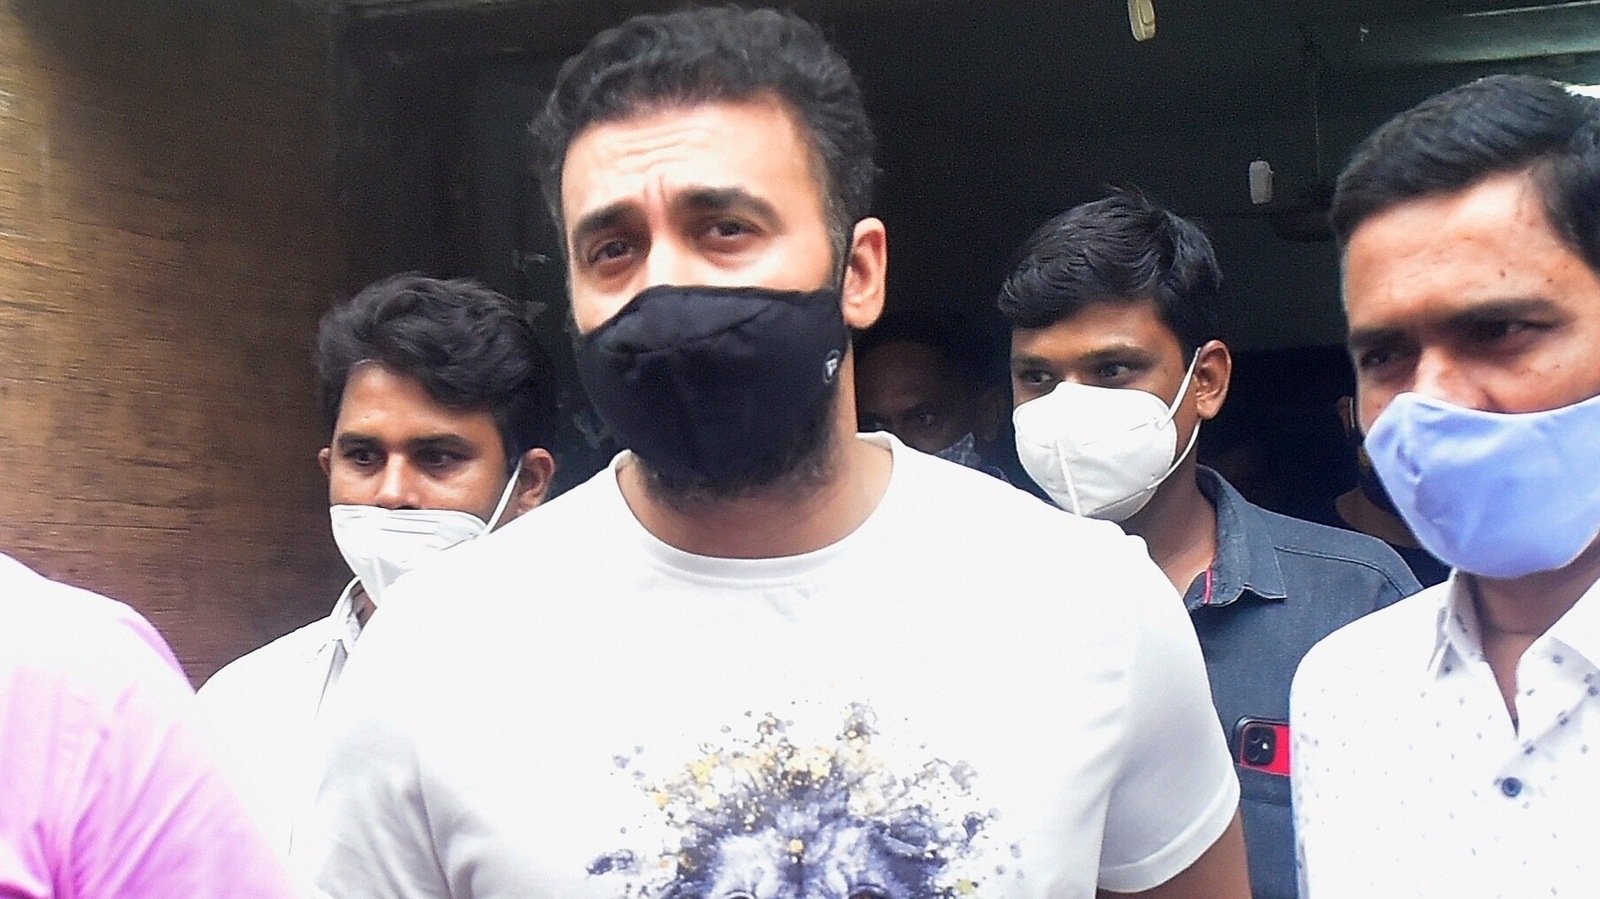 raj-kundra-is-hurt-by-media-trial-after-arrest-in-porn-case-never-participated-in-anything-pornographic-in-life